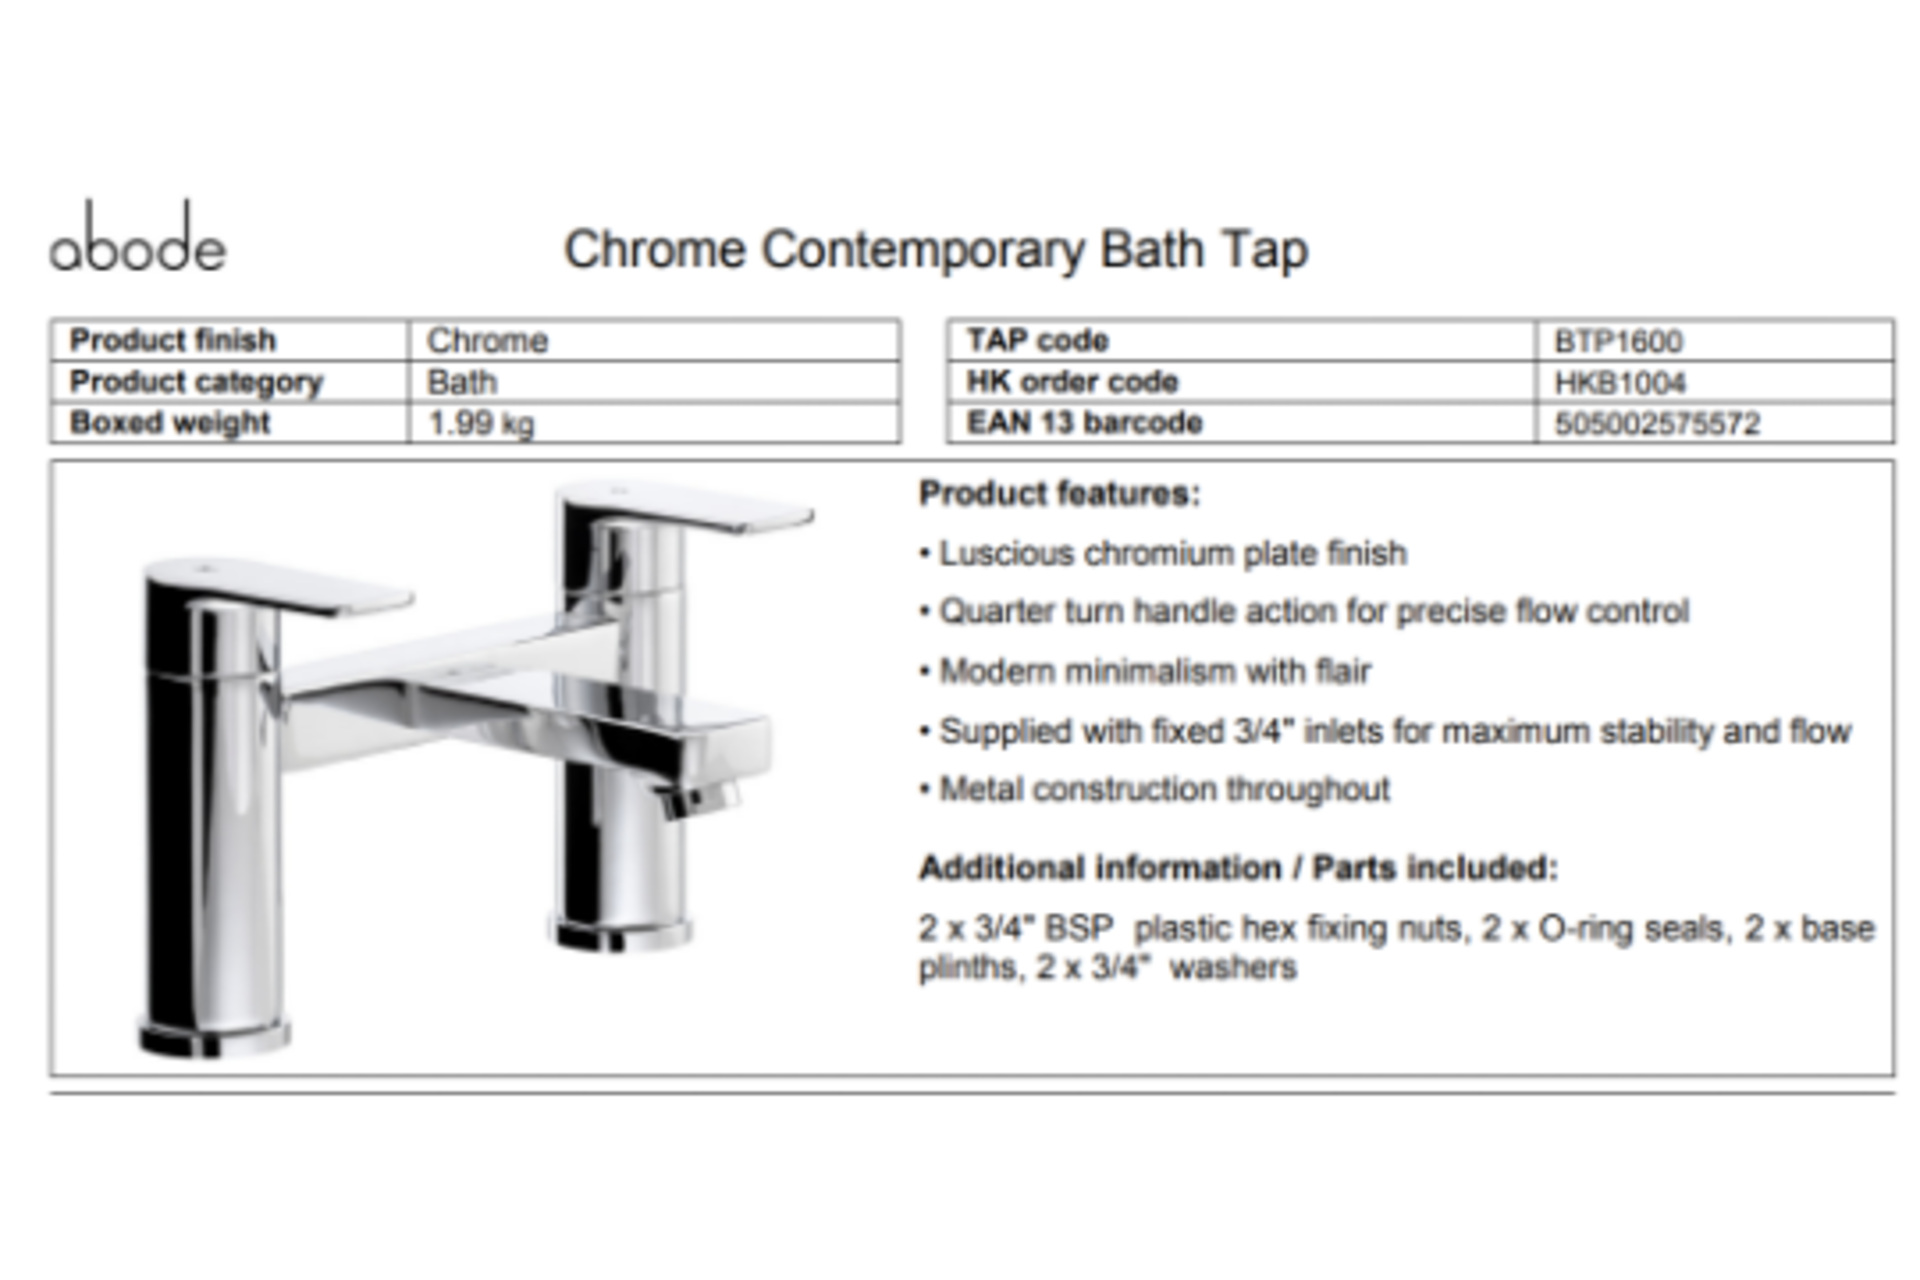 12 x NEW BOXED CONTEMPORARY Abode Lamona CHROME BATH TAPS. RRP £129.99 EACH, GIVING THIS LOT A TOTAL - Image 2 of 4